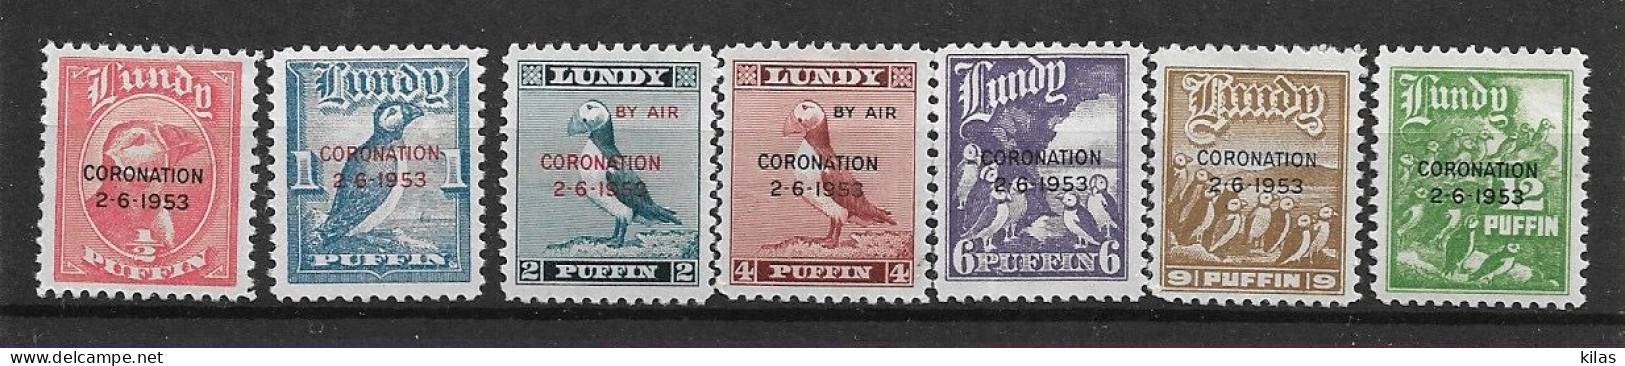 LUNDY Island Great Britain 1953 Overprinted - Coronation MNH - Local Issues